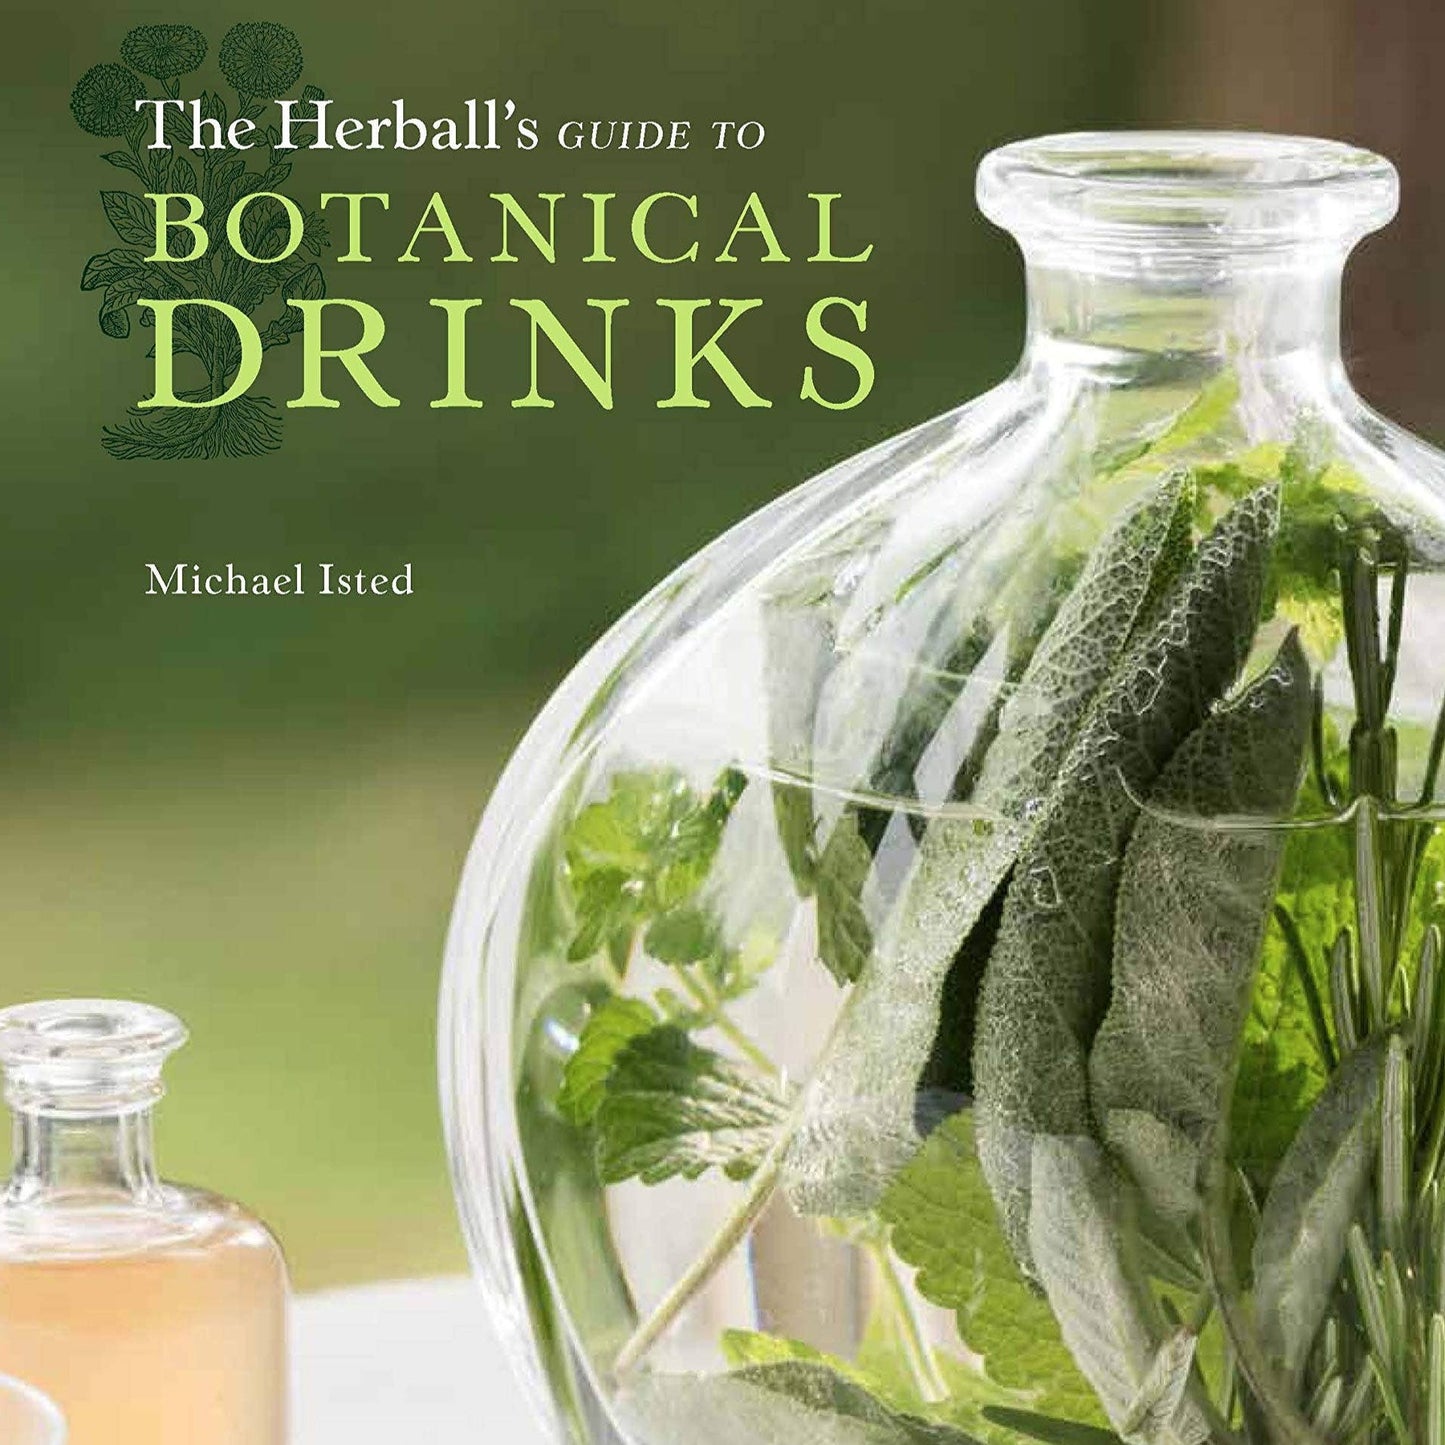 Herball's Guide to Botanical Drinks: Alchemy of Plants